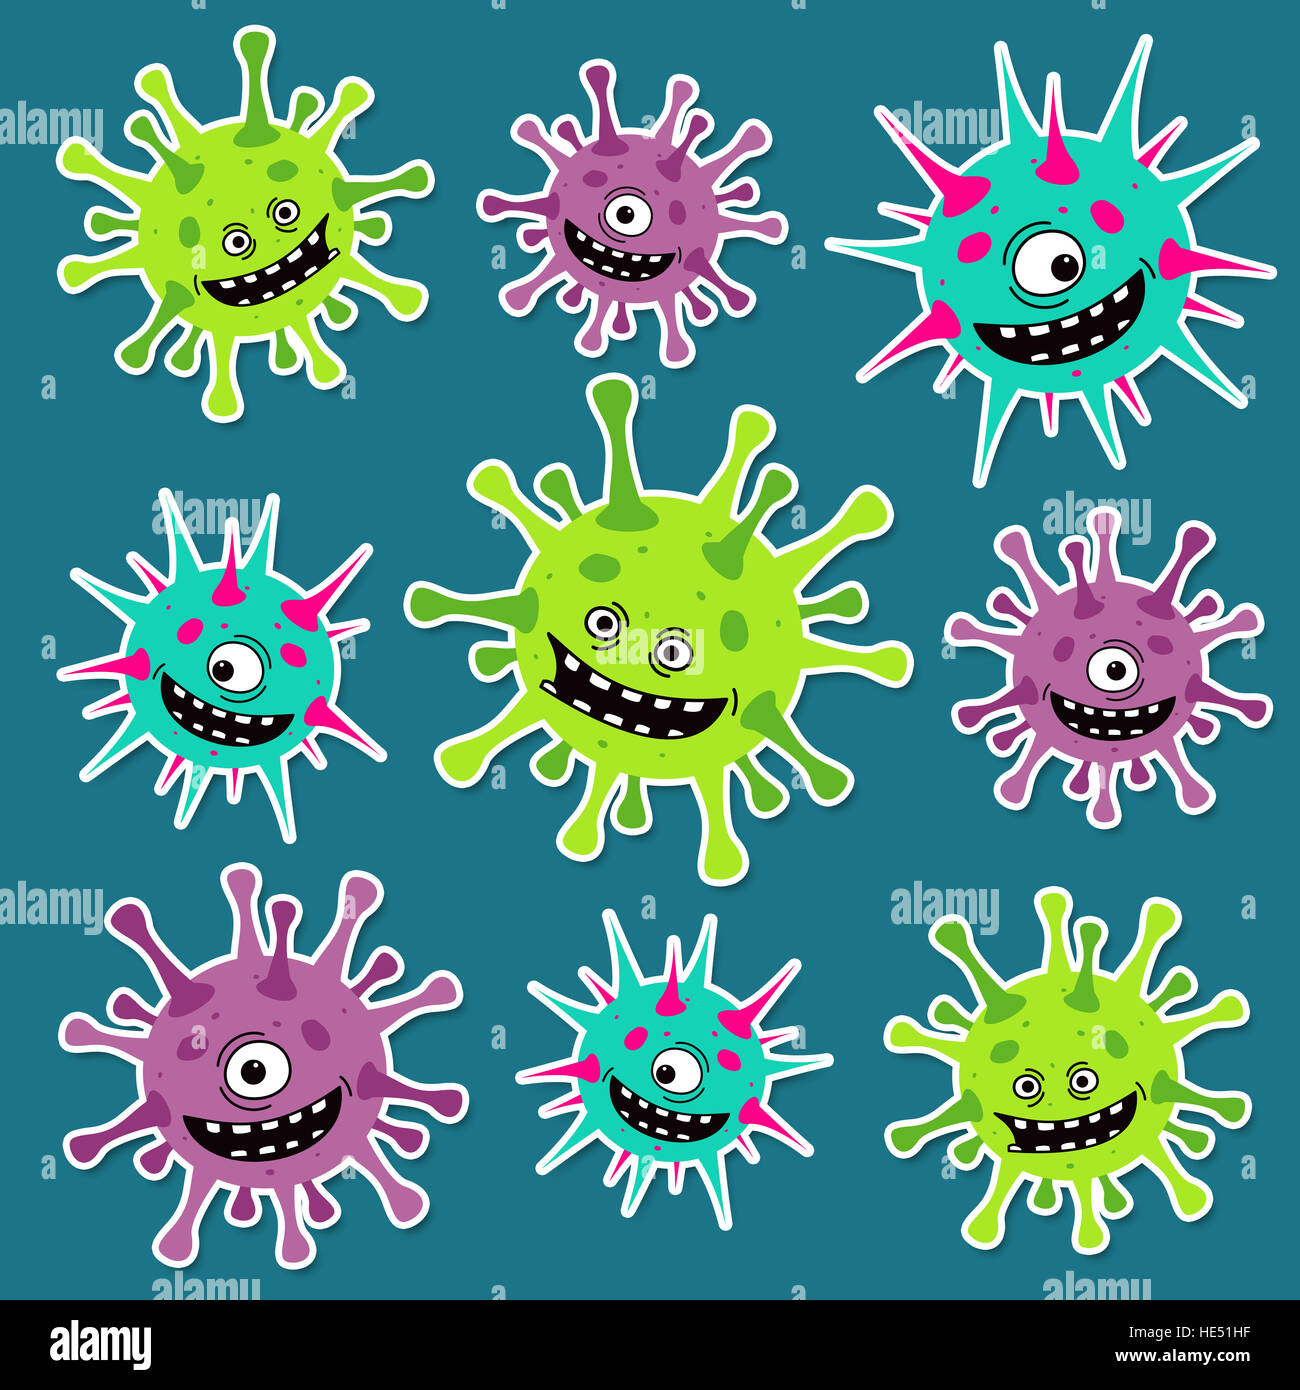 Cartoon viruses, germs or bacteria pattern. Funny colorful set of stickers on blue background Stock Photo